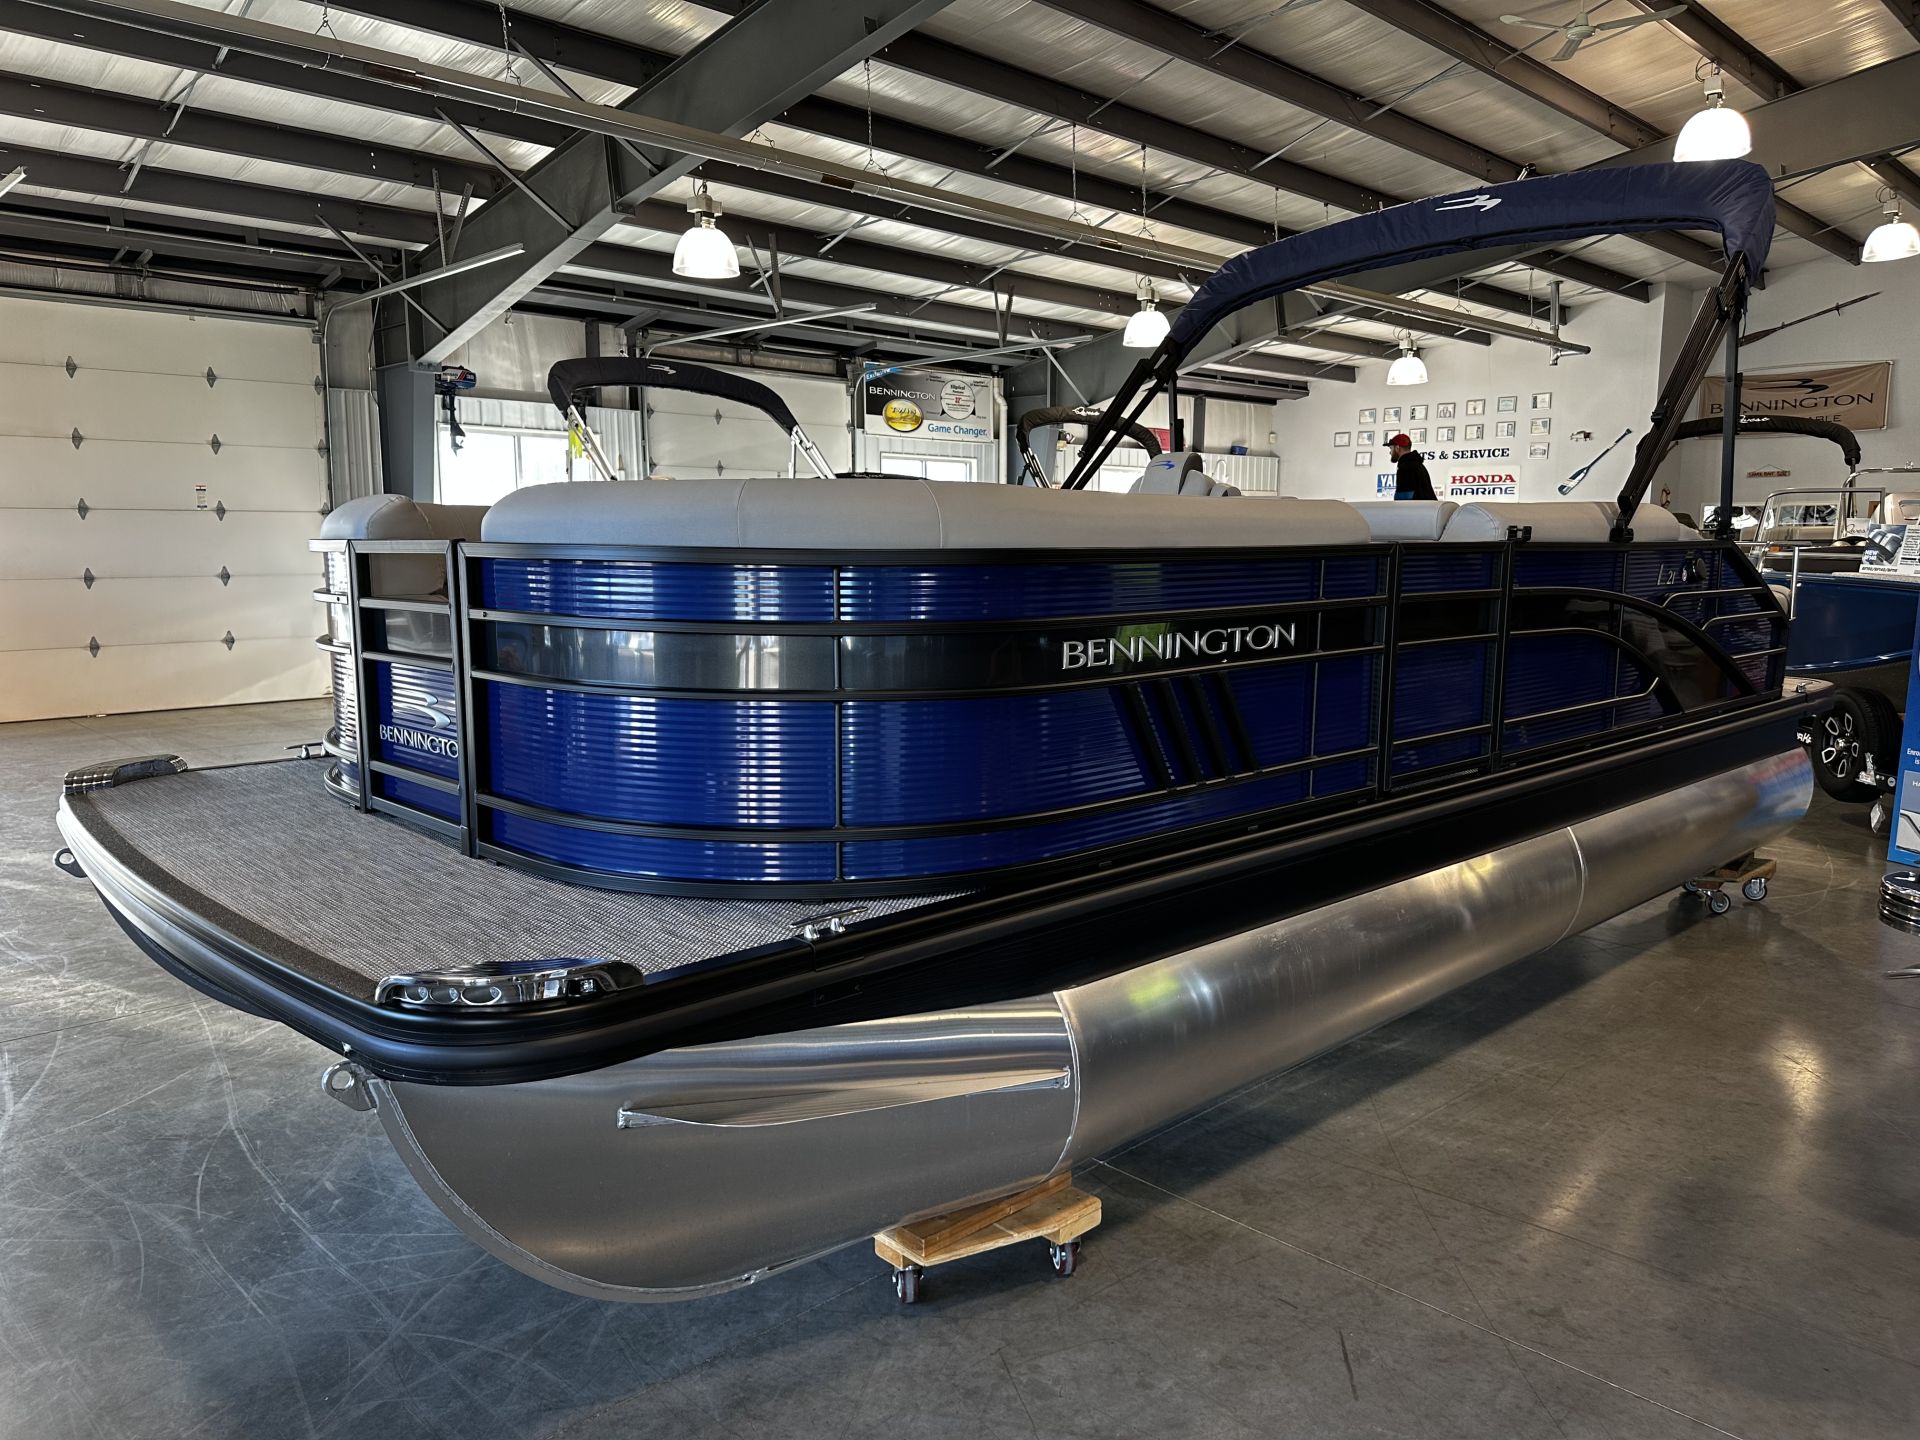 How to Choose from the Used Pontoon Boats for Sale